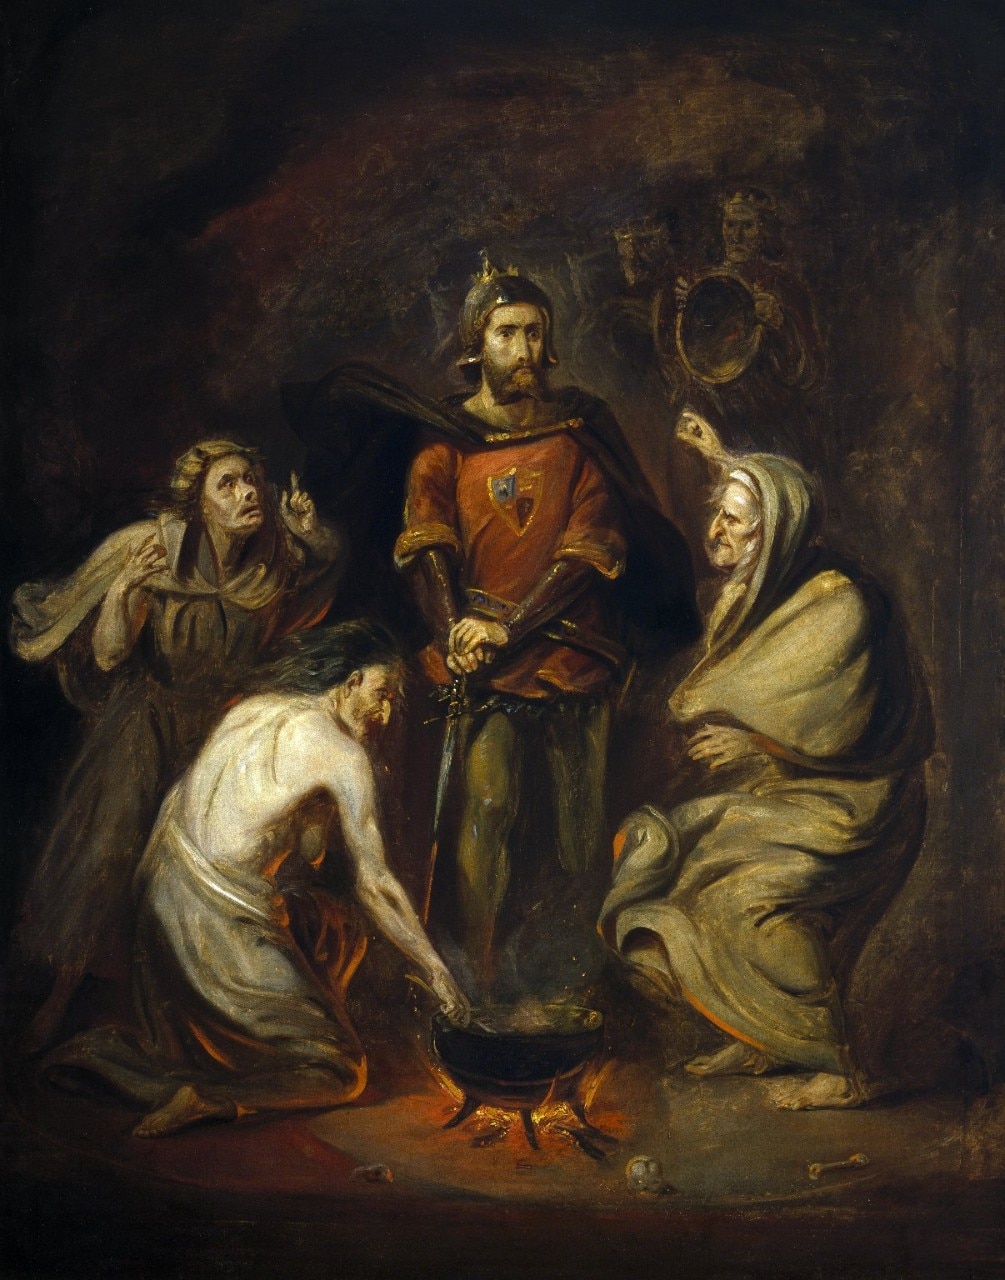 An illustration of Macbeth and the Witches. Image: Thomas Barker/Wikimedia Commons